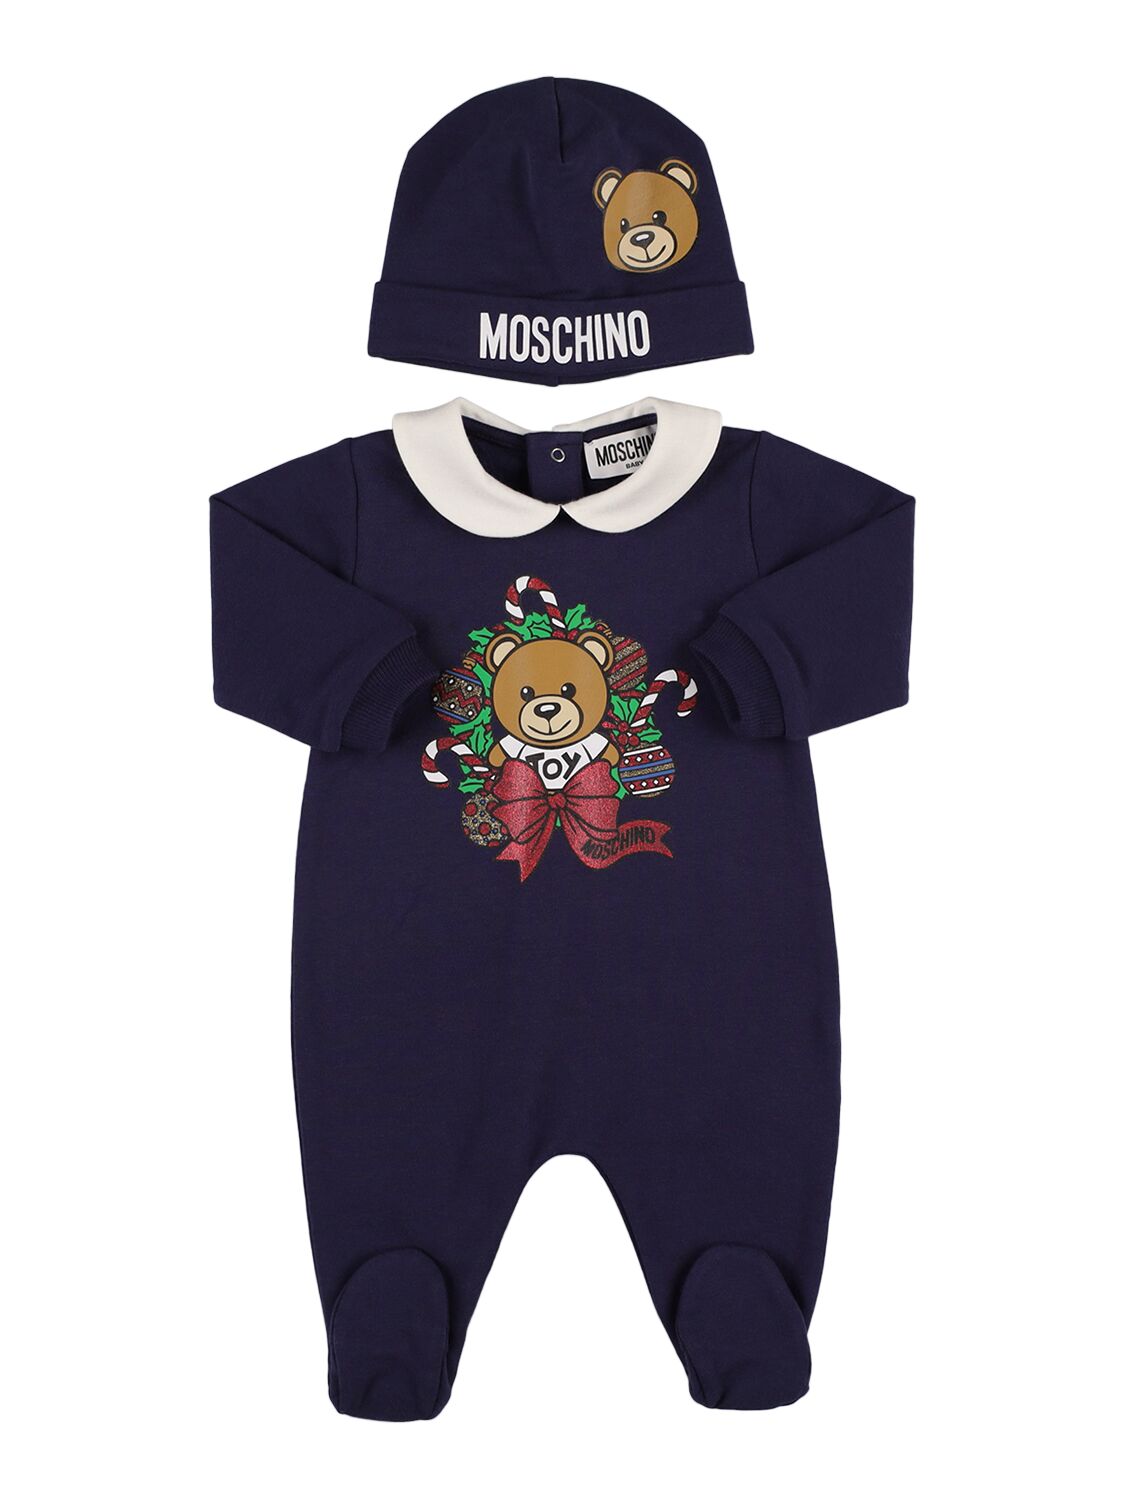 Moschino Babies' Printed Cotton Romper & Hat In Navy